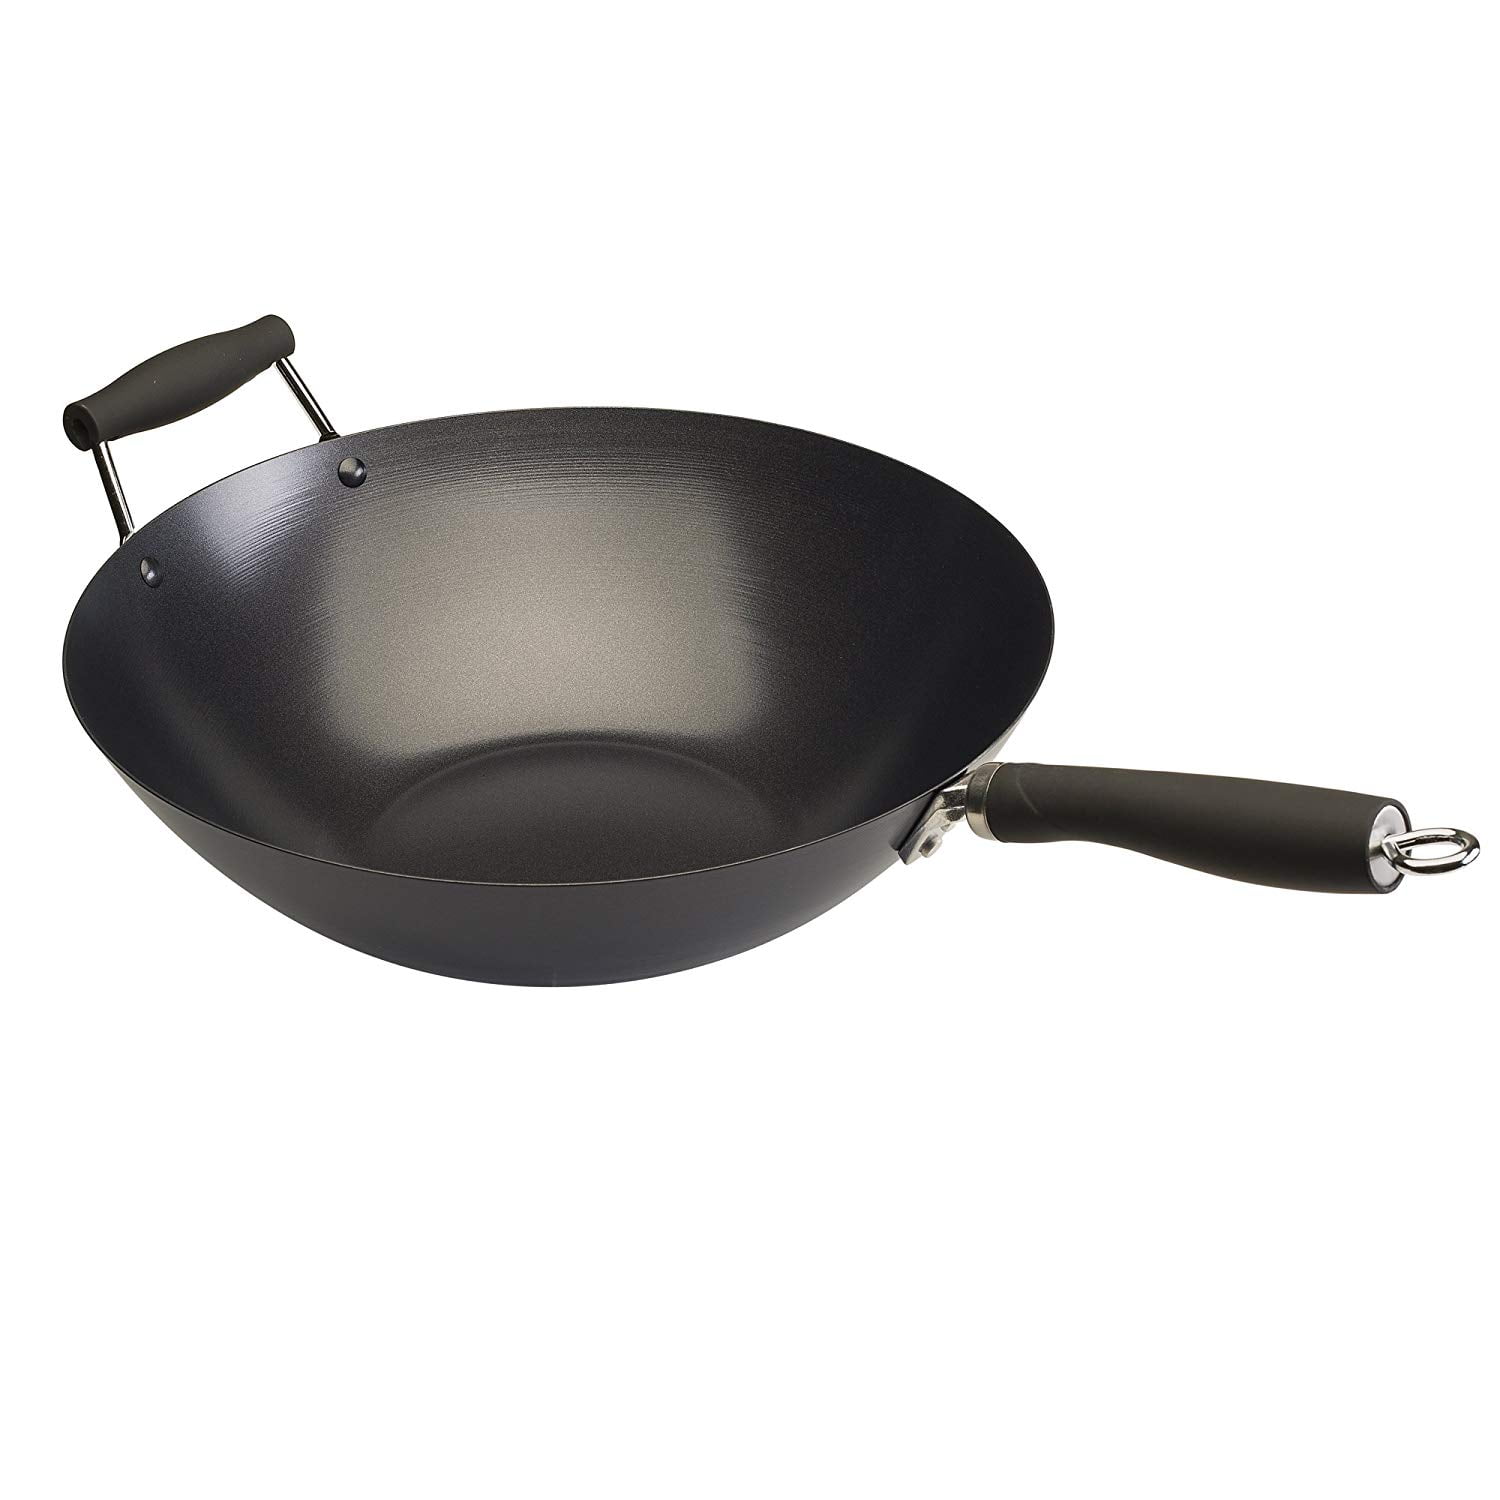 5-best-woks-for-electric-stove-cast-iron-others